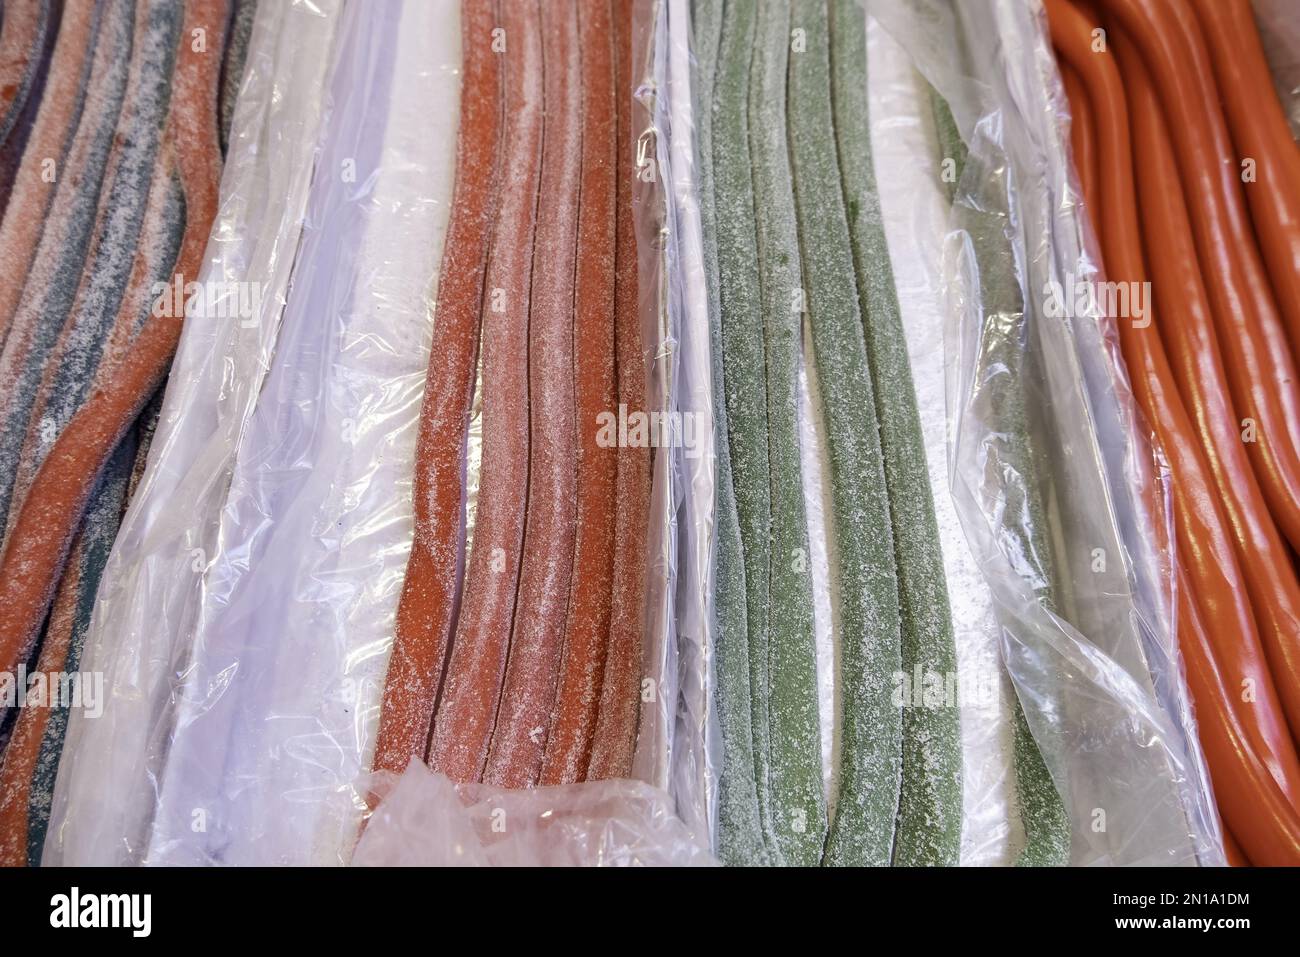 Detail of traditional sweets in an old market, unhealthy food Stock Photo